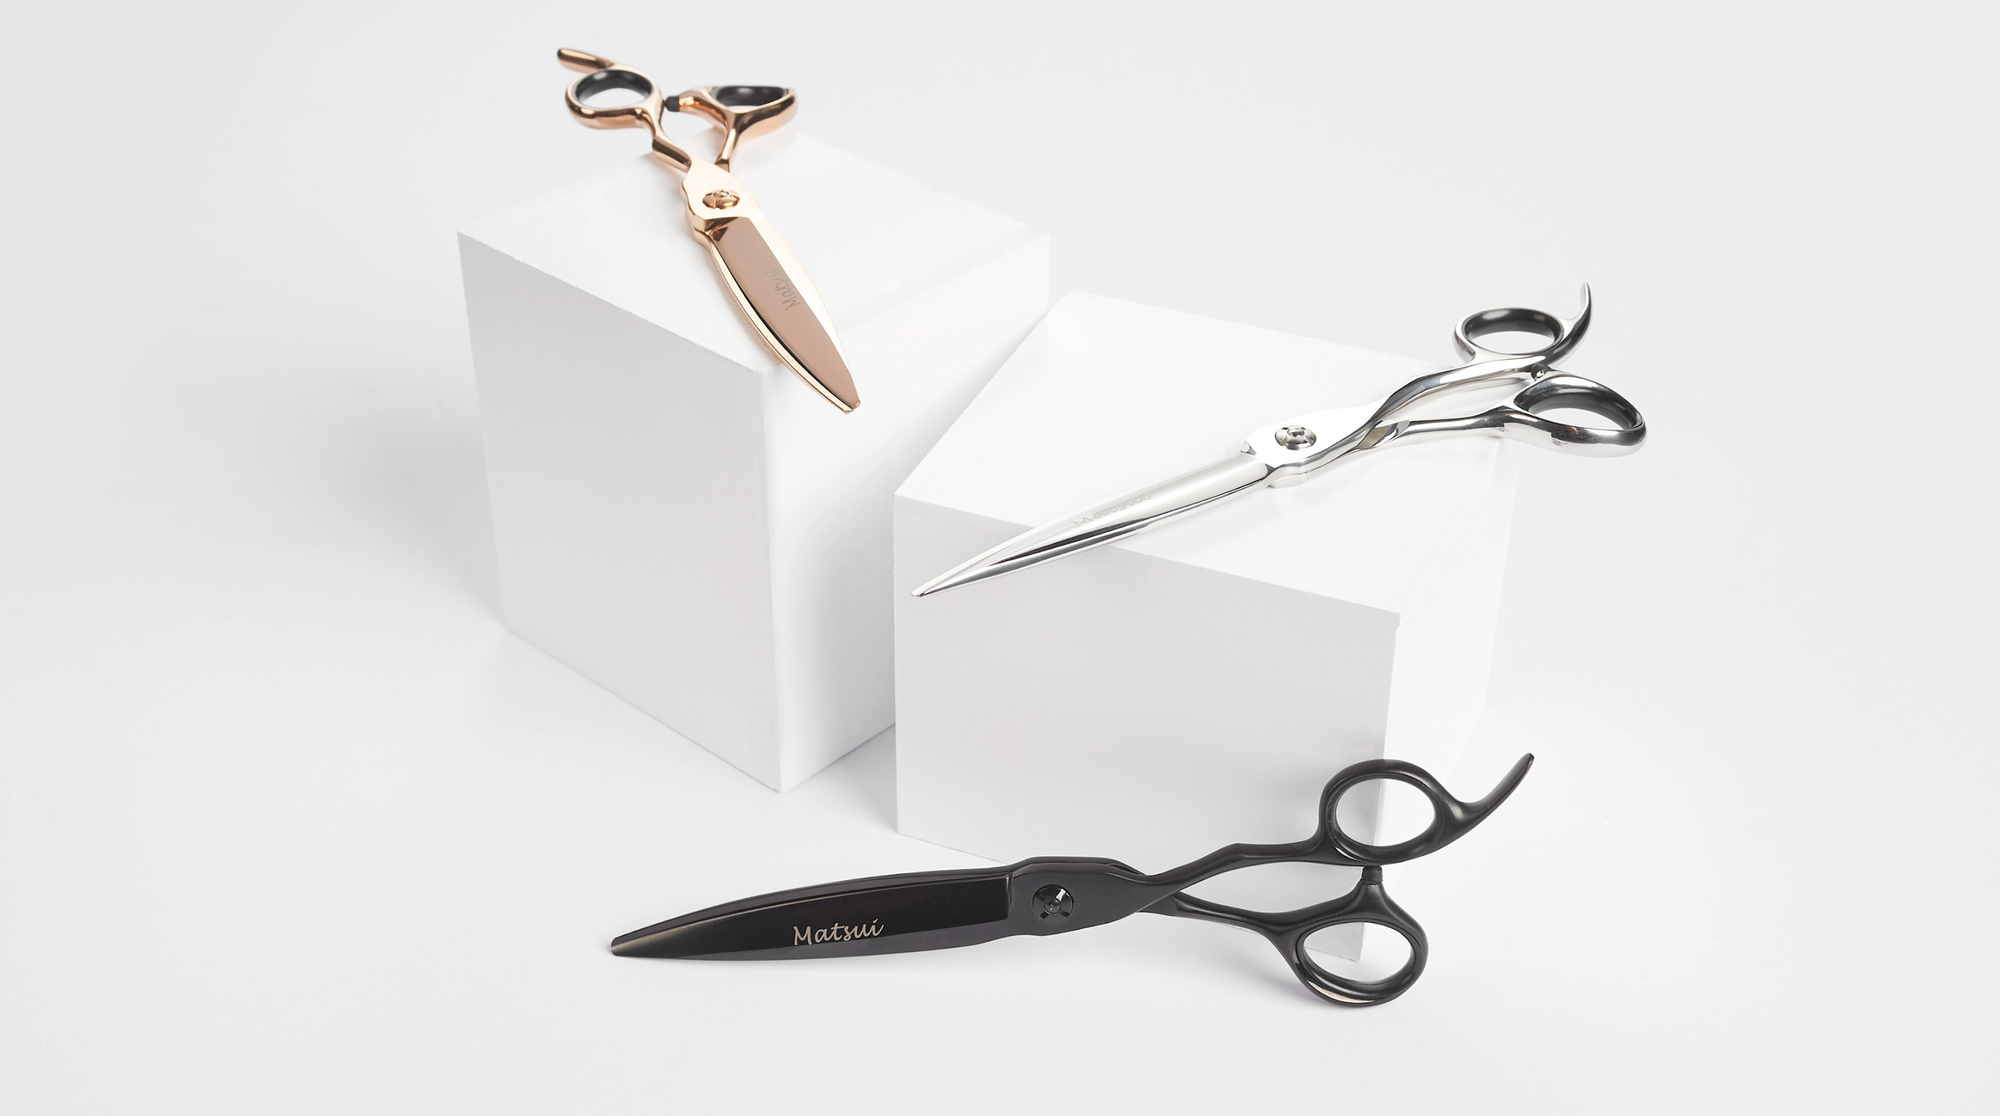 What are hair cutting scissors?